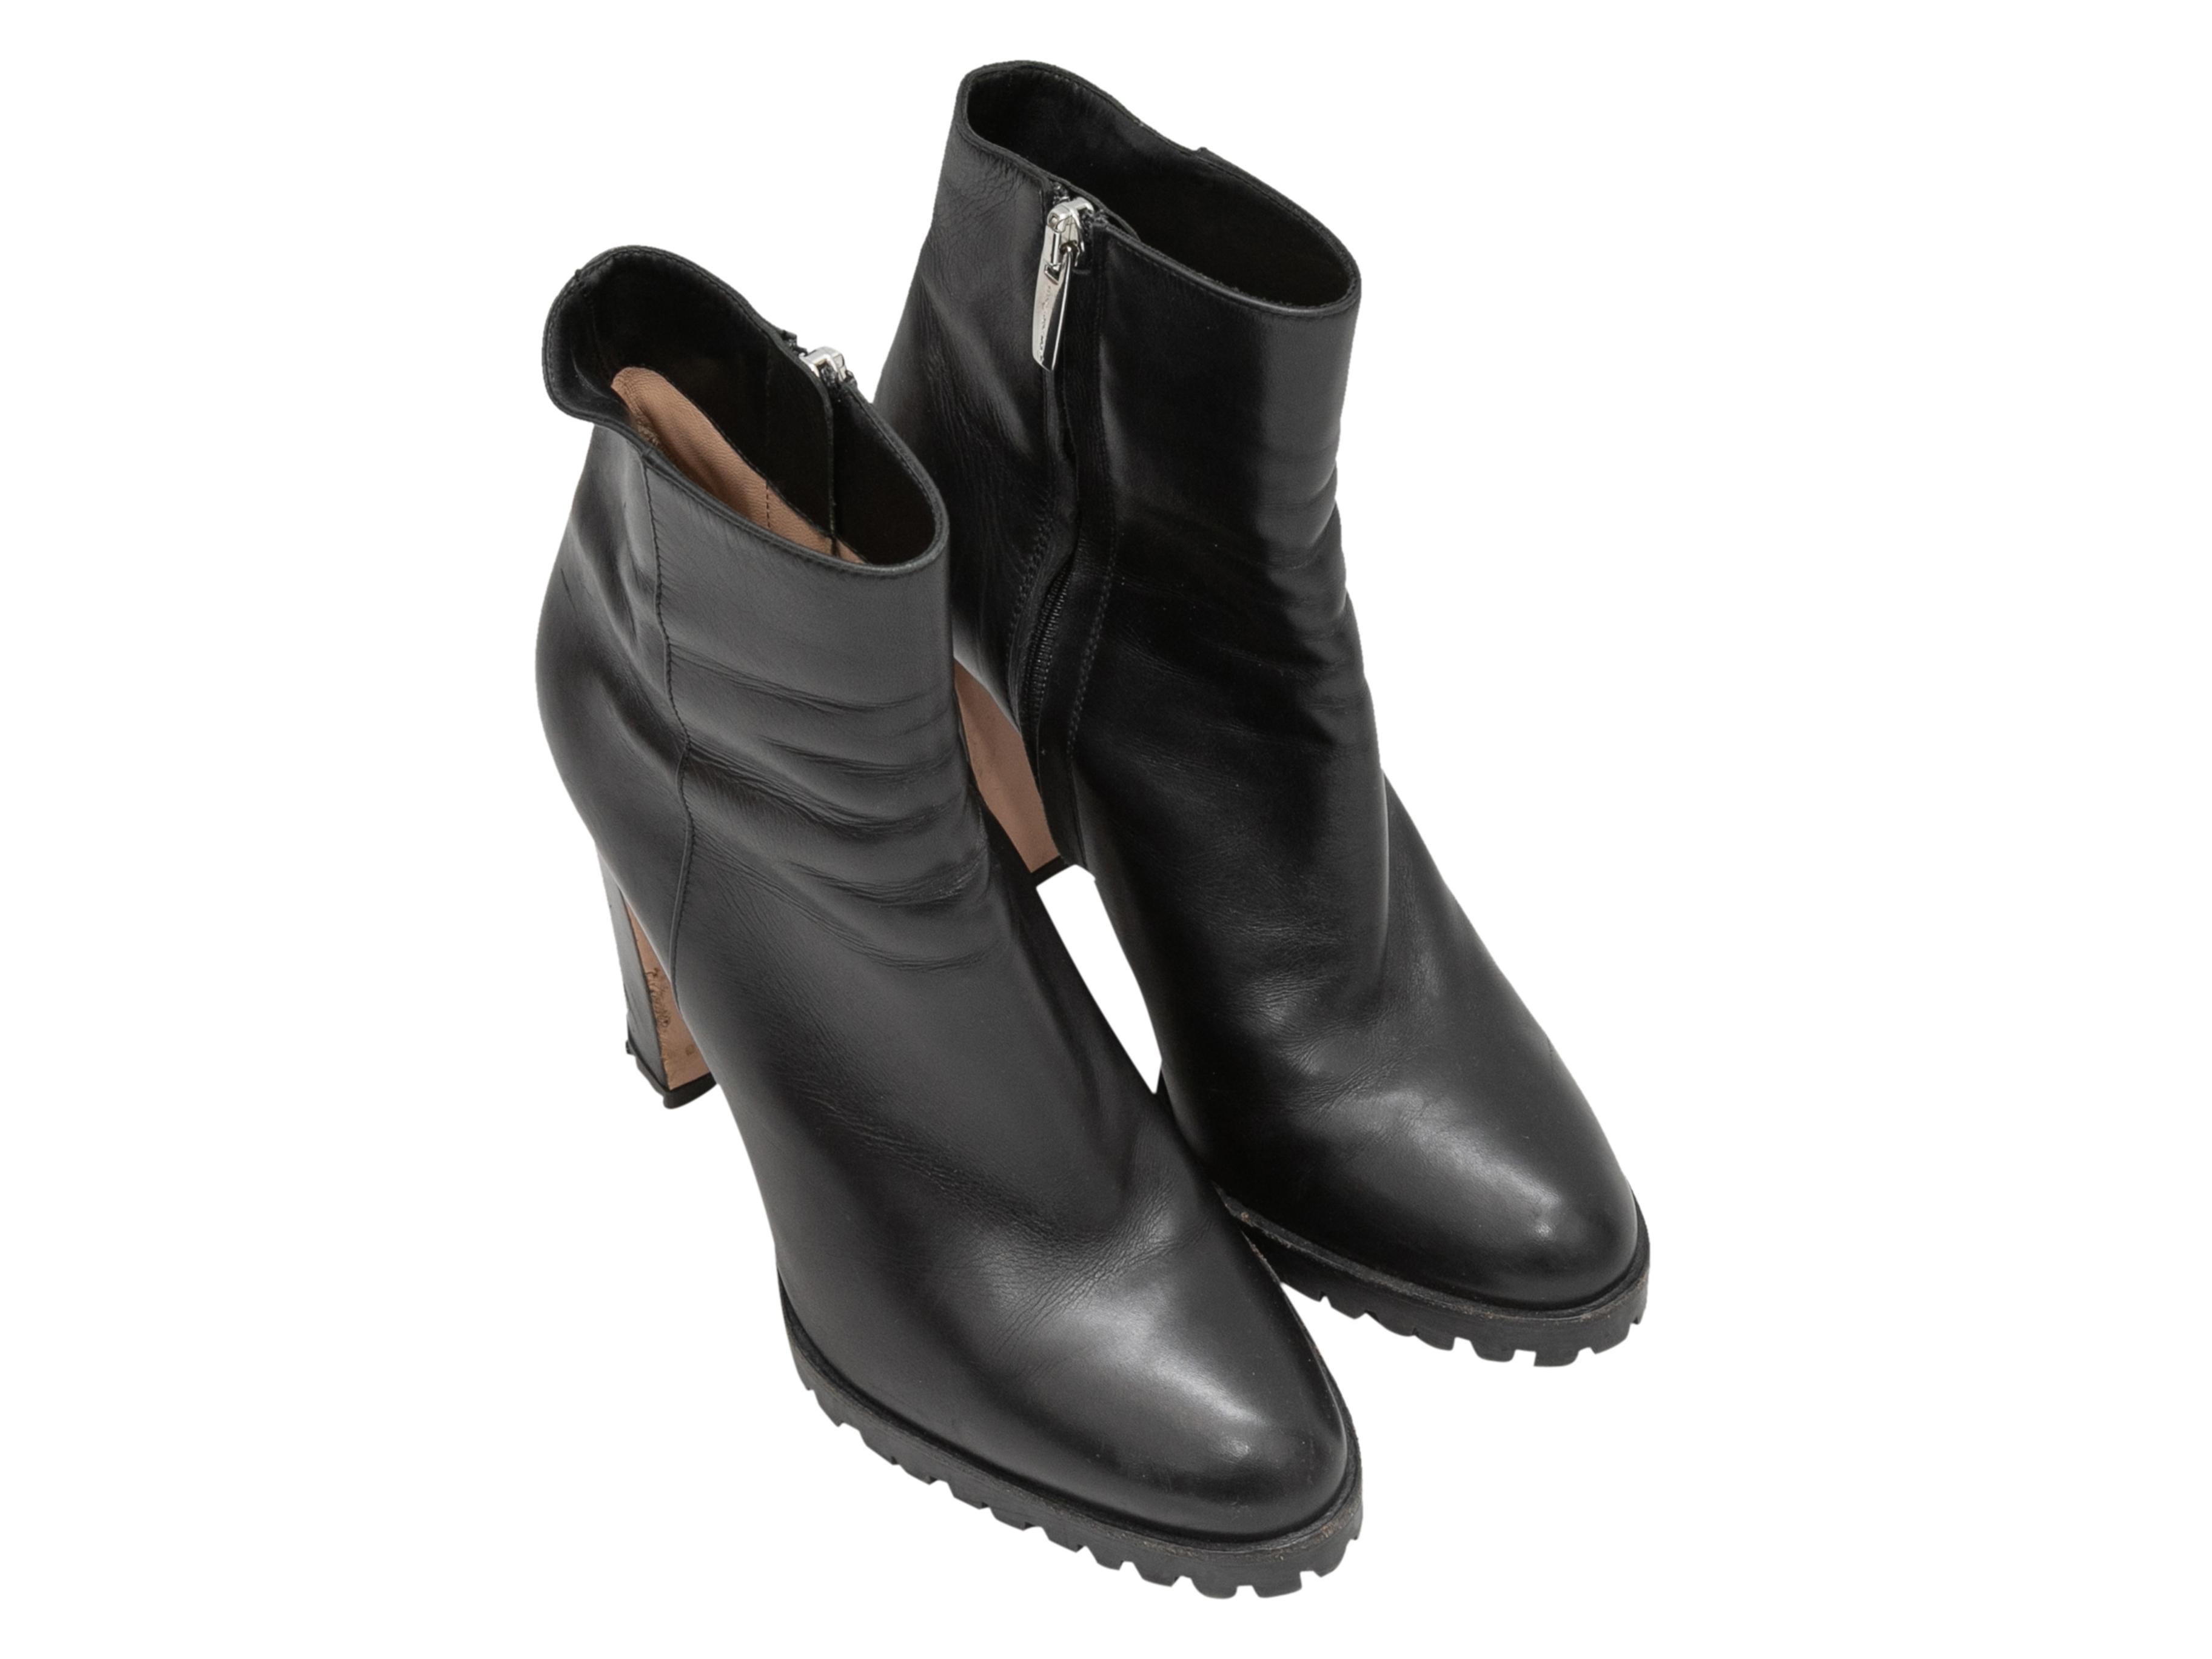 Black leather heeled ankle boots by Gianvito Rossi. Block heels. Zip closures at inner sides. 4.25